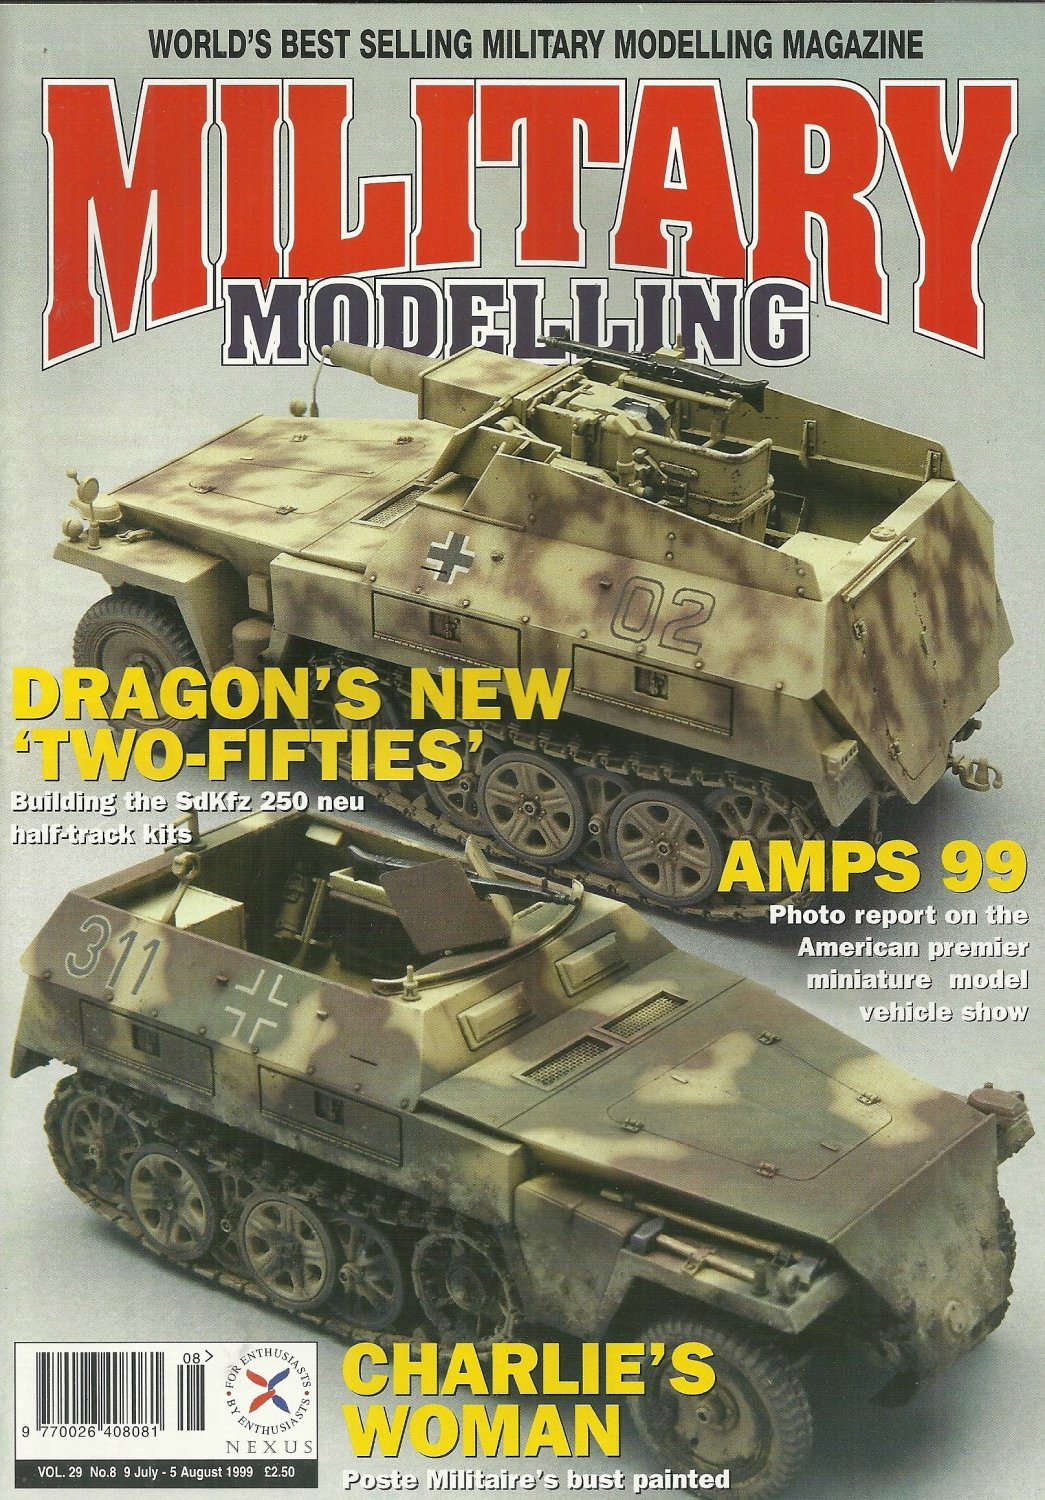 MILITARY MODELLING MAGAZINE #8 July/August 1999 Dragon's New "Two-Fifties"